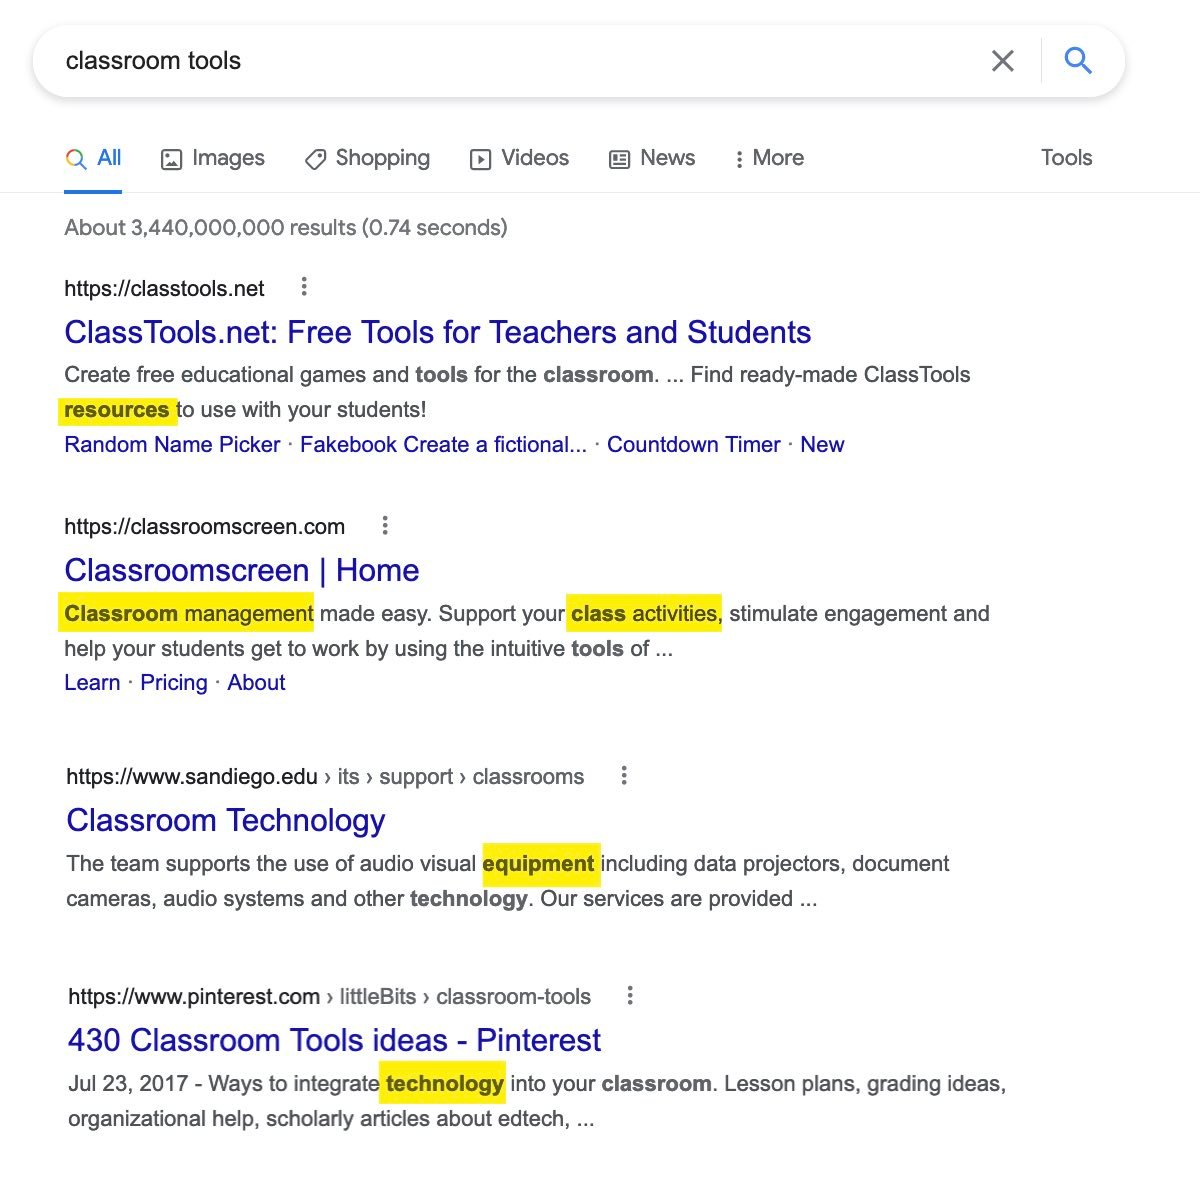 Screenshot of search results for "classroom tools"